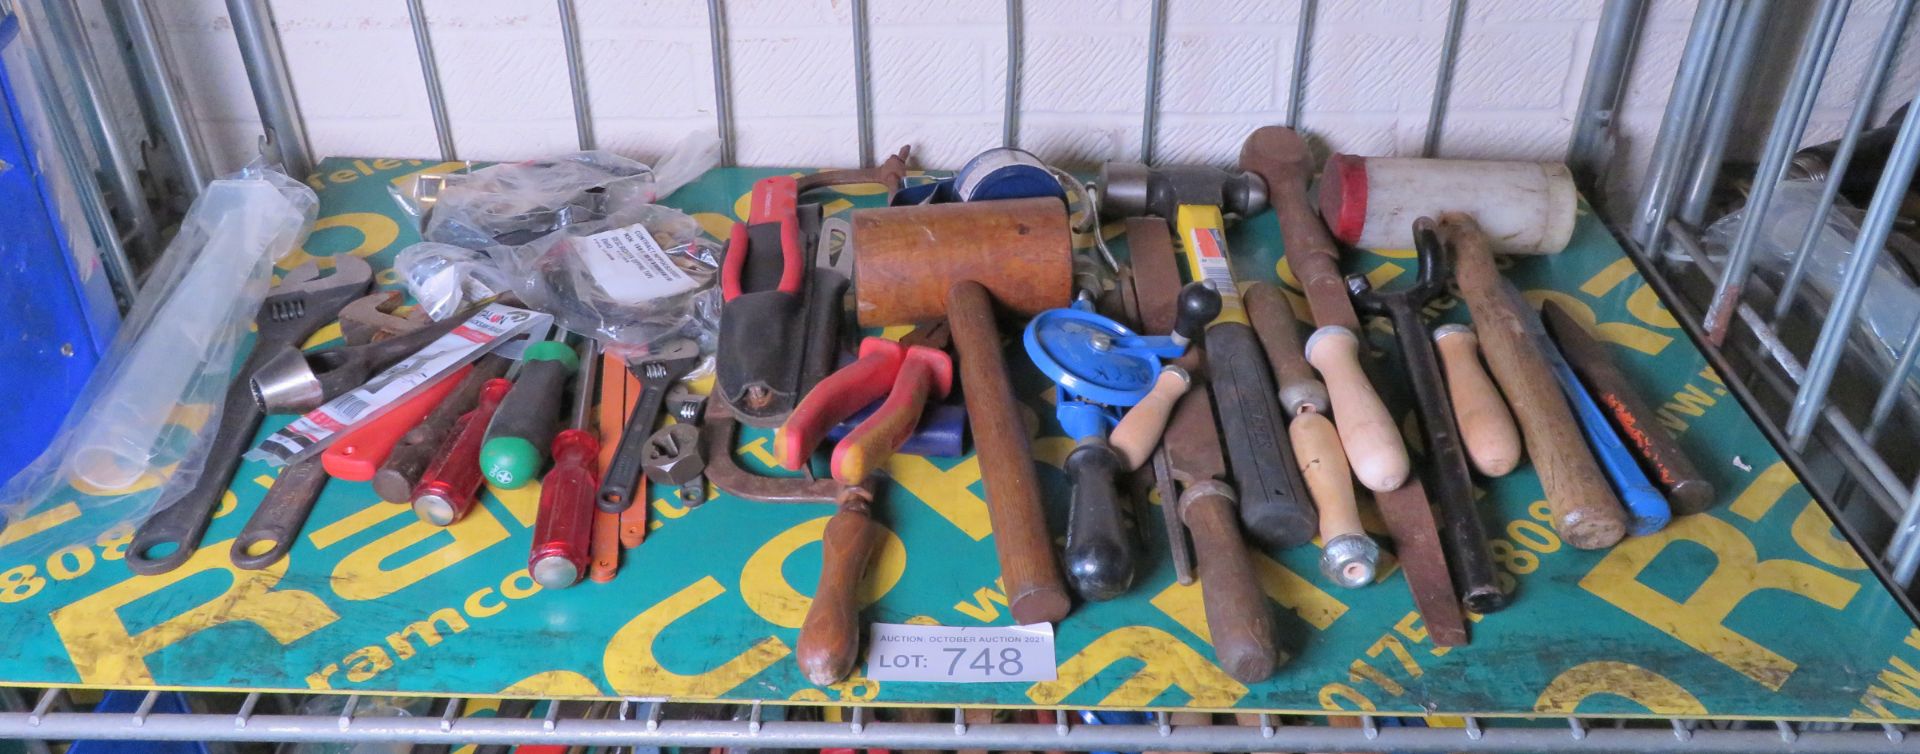 Various Hand Tools - mallets, adjustable spanners, screwdrivers, hammer, files